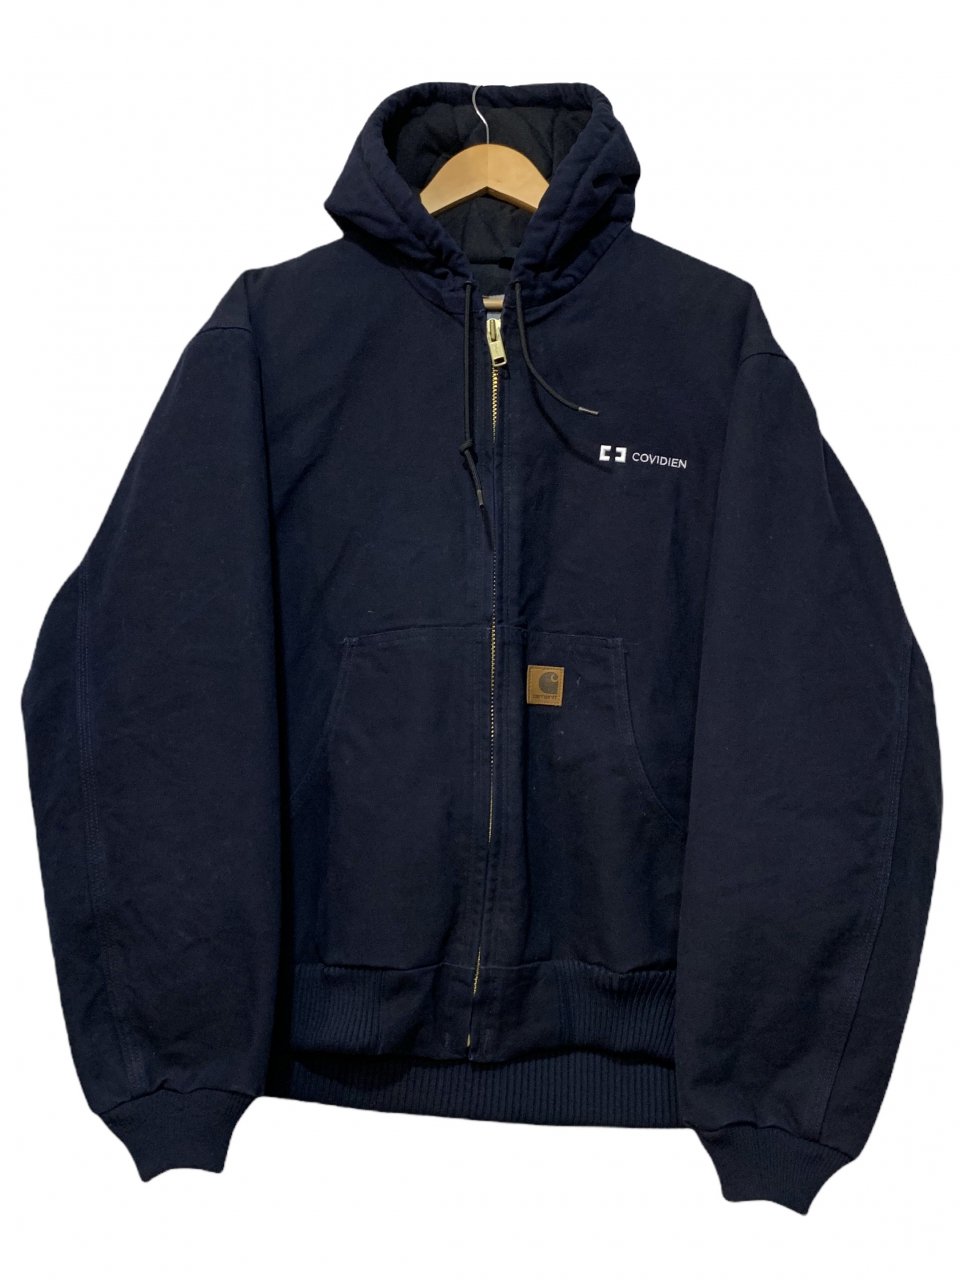 Carhartt Quilted Flannel Lined Active Jacket 紺 L カーハート 